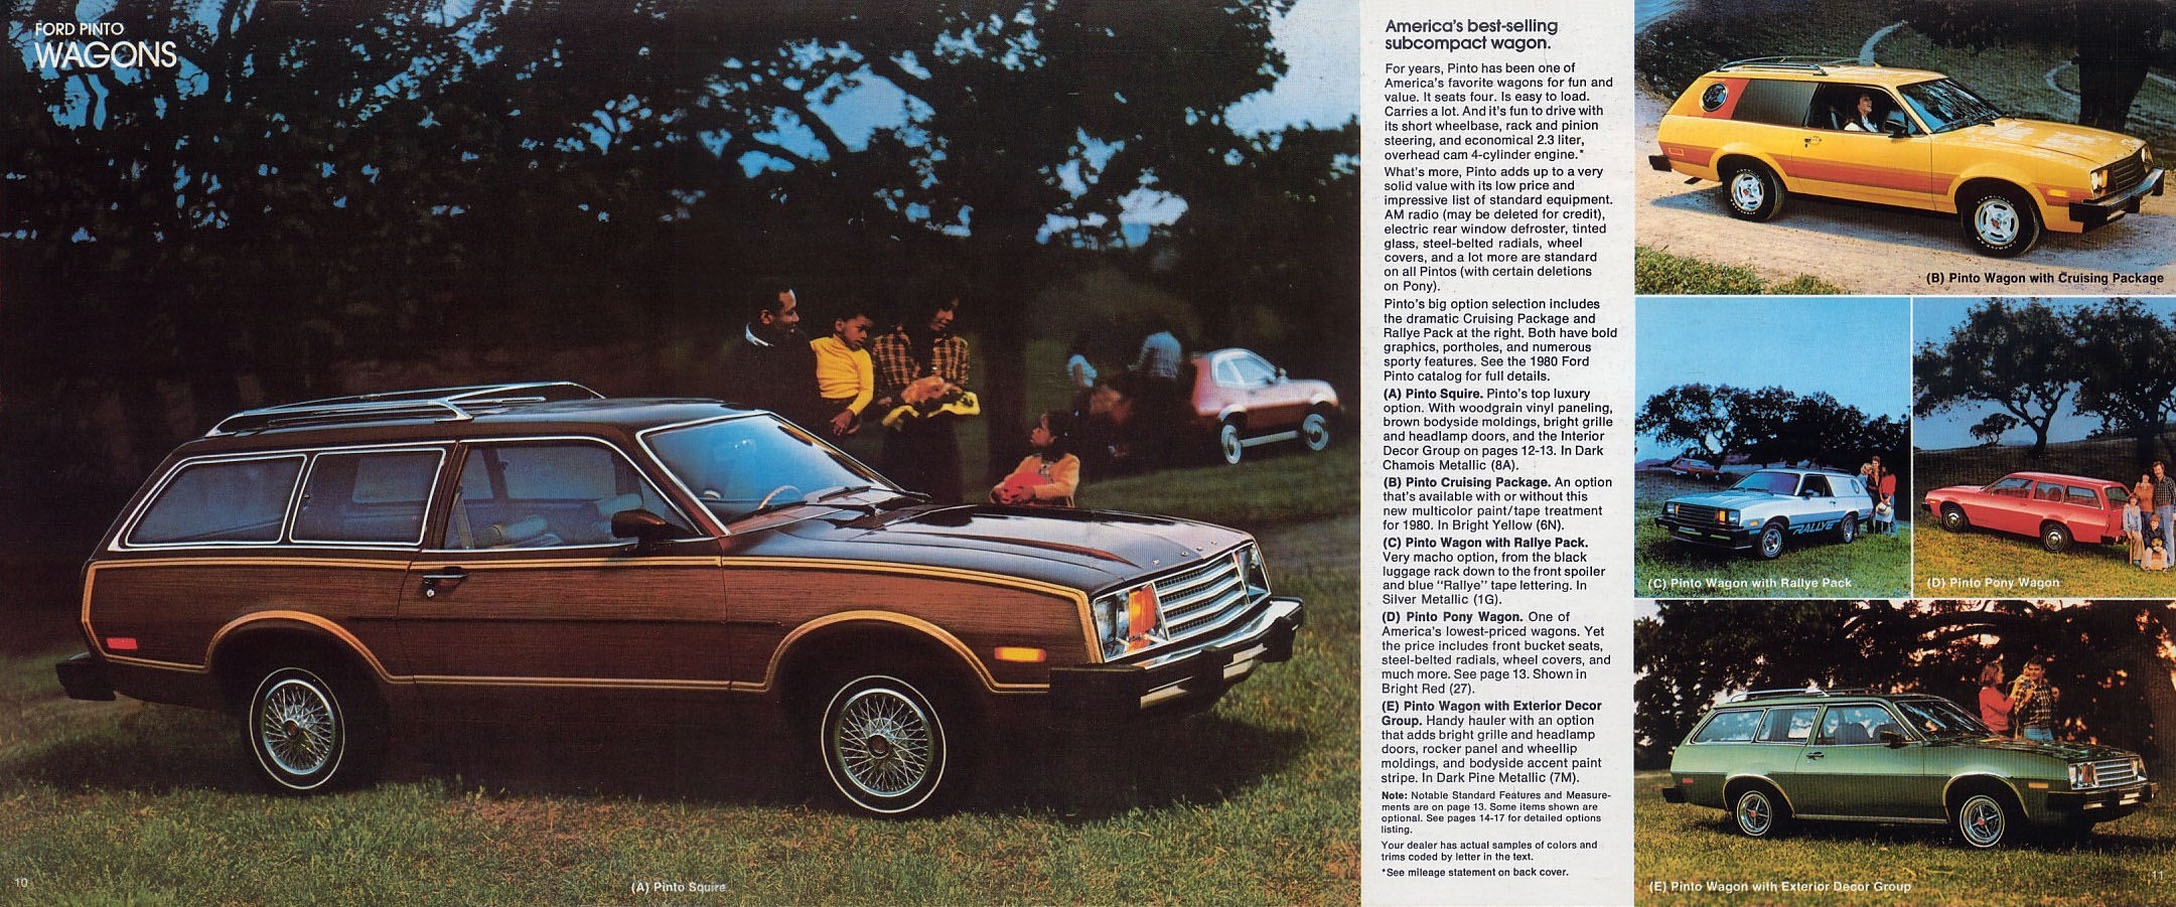 1980_Ford_Wagons-06